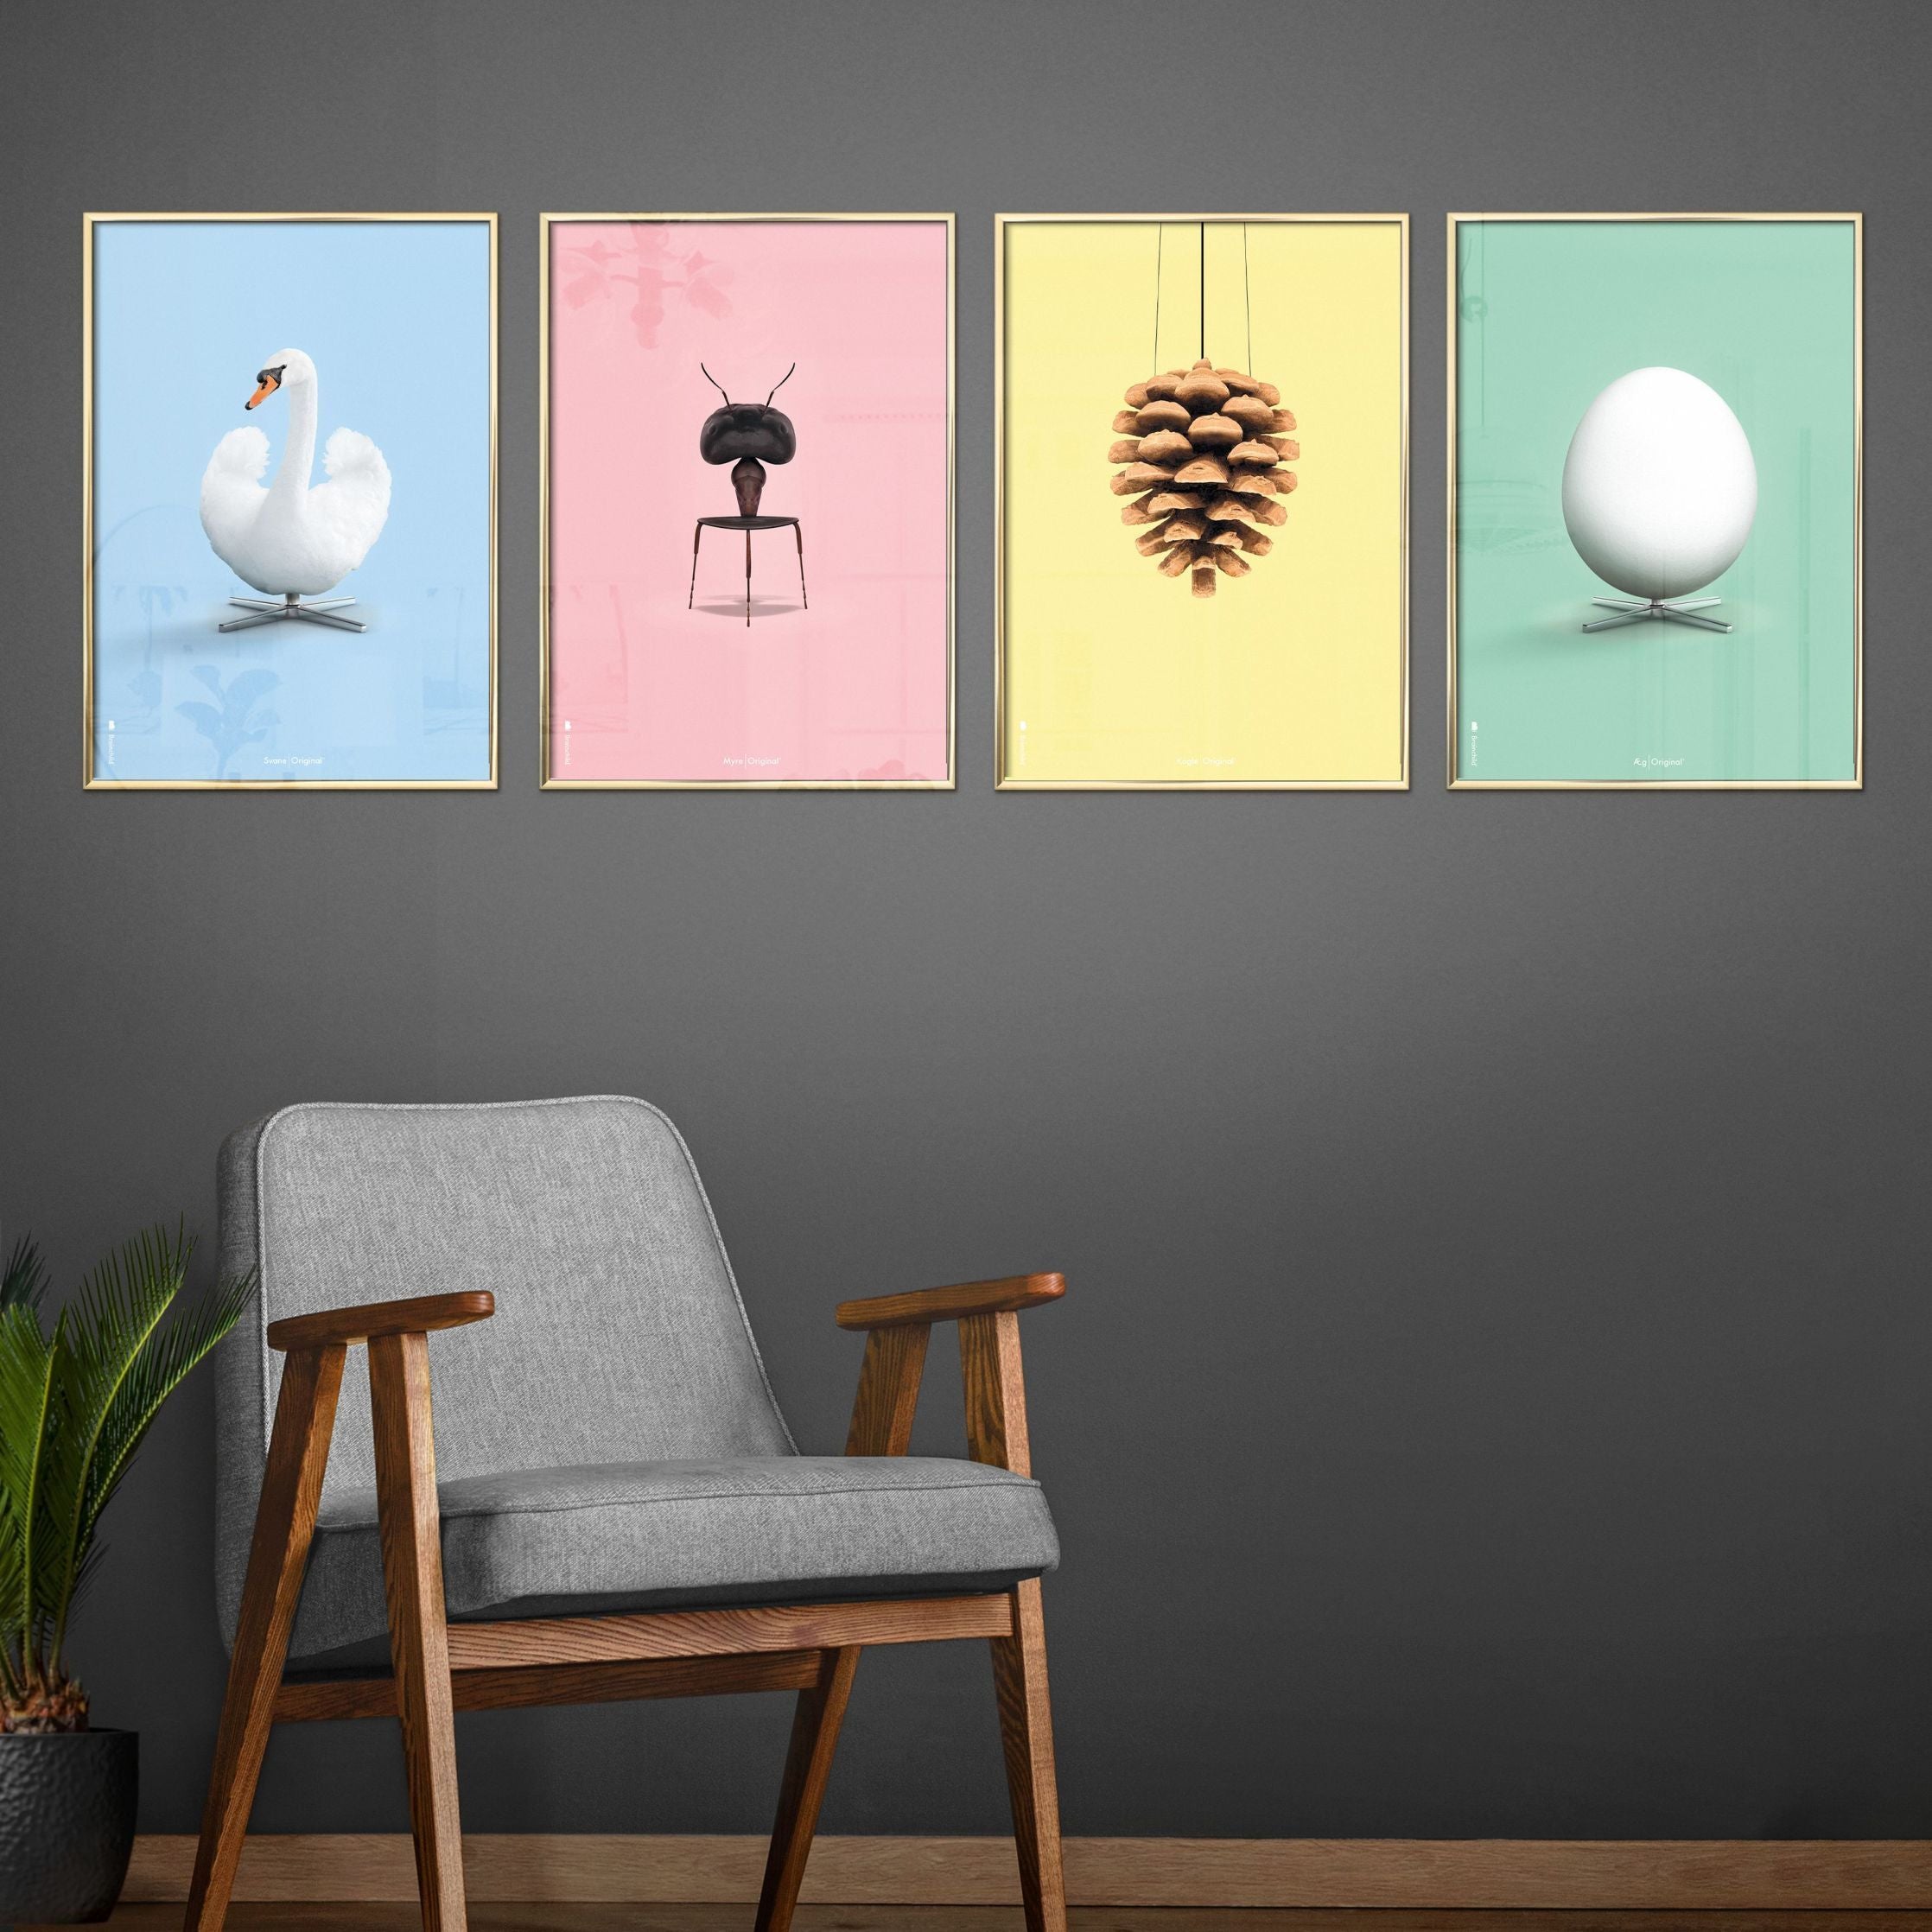 Brainchild Pine Cone Classic Poster, Frame In Black Lacquered Wood 30x40 Cm, Yellow Background